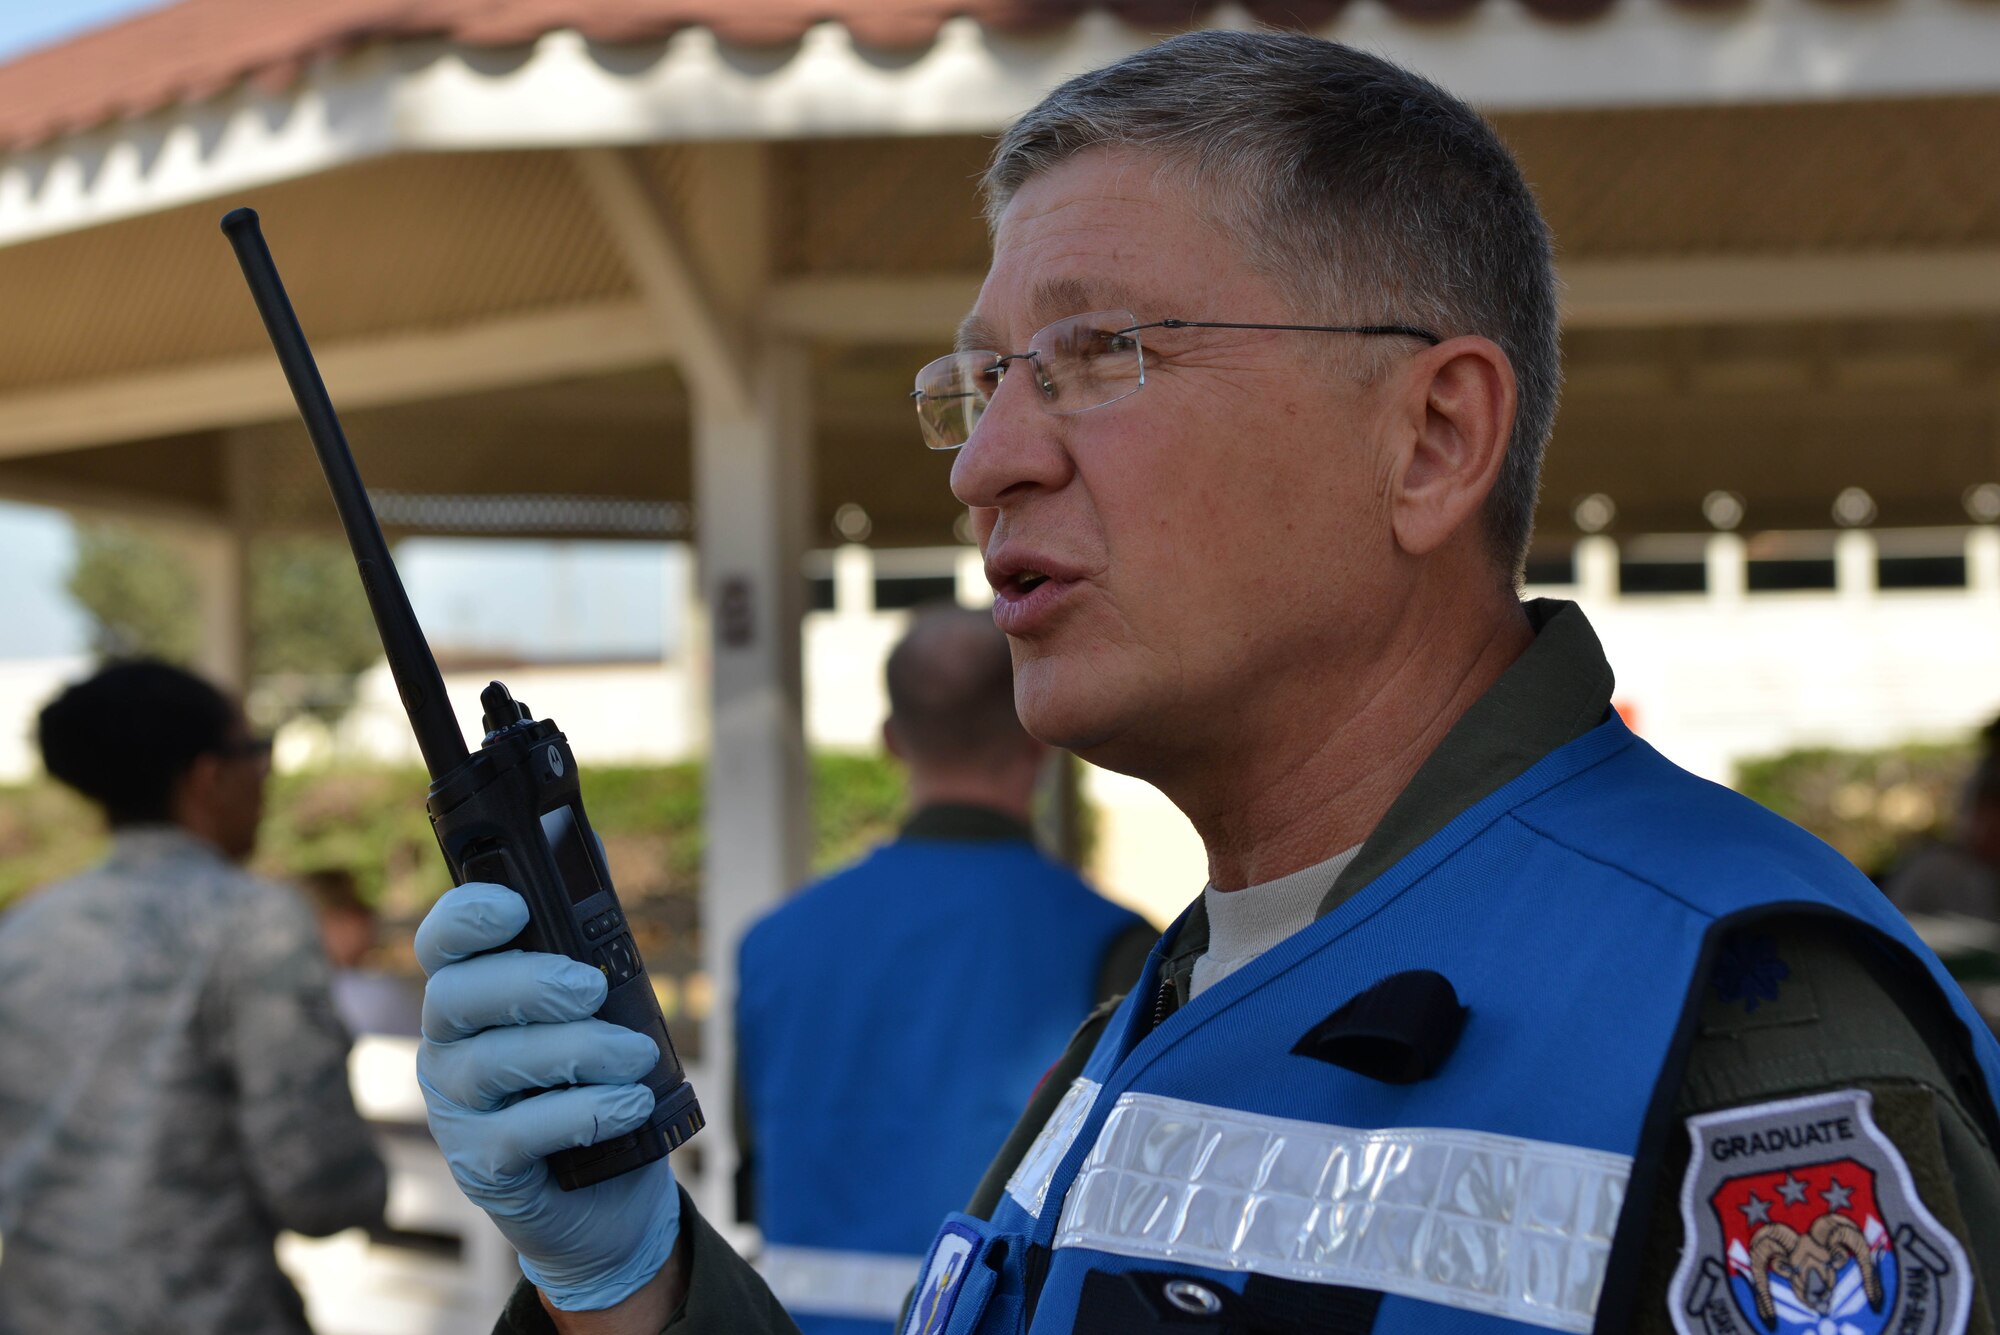 U.S. Air Force Lt. Col. Paul Puchta, 39th Medical Group chief of aerospace medicine, communicates over a land mobile radio (LMR) during a mass casualty exercise Sept. 21, 2016, at Incirlik Air Base, Turkey. LMRs allow quick responses for personnel in the field to communicate when separated. (U.S. Air Force photo by Senior Airman John Nieves Camacho)